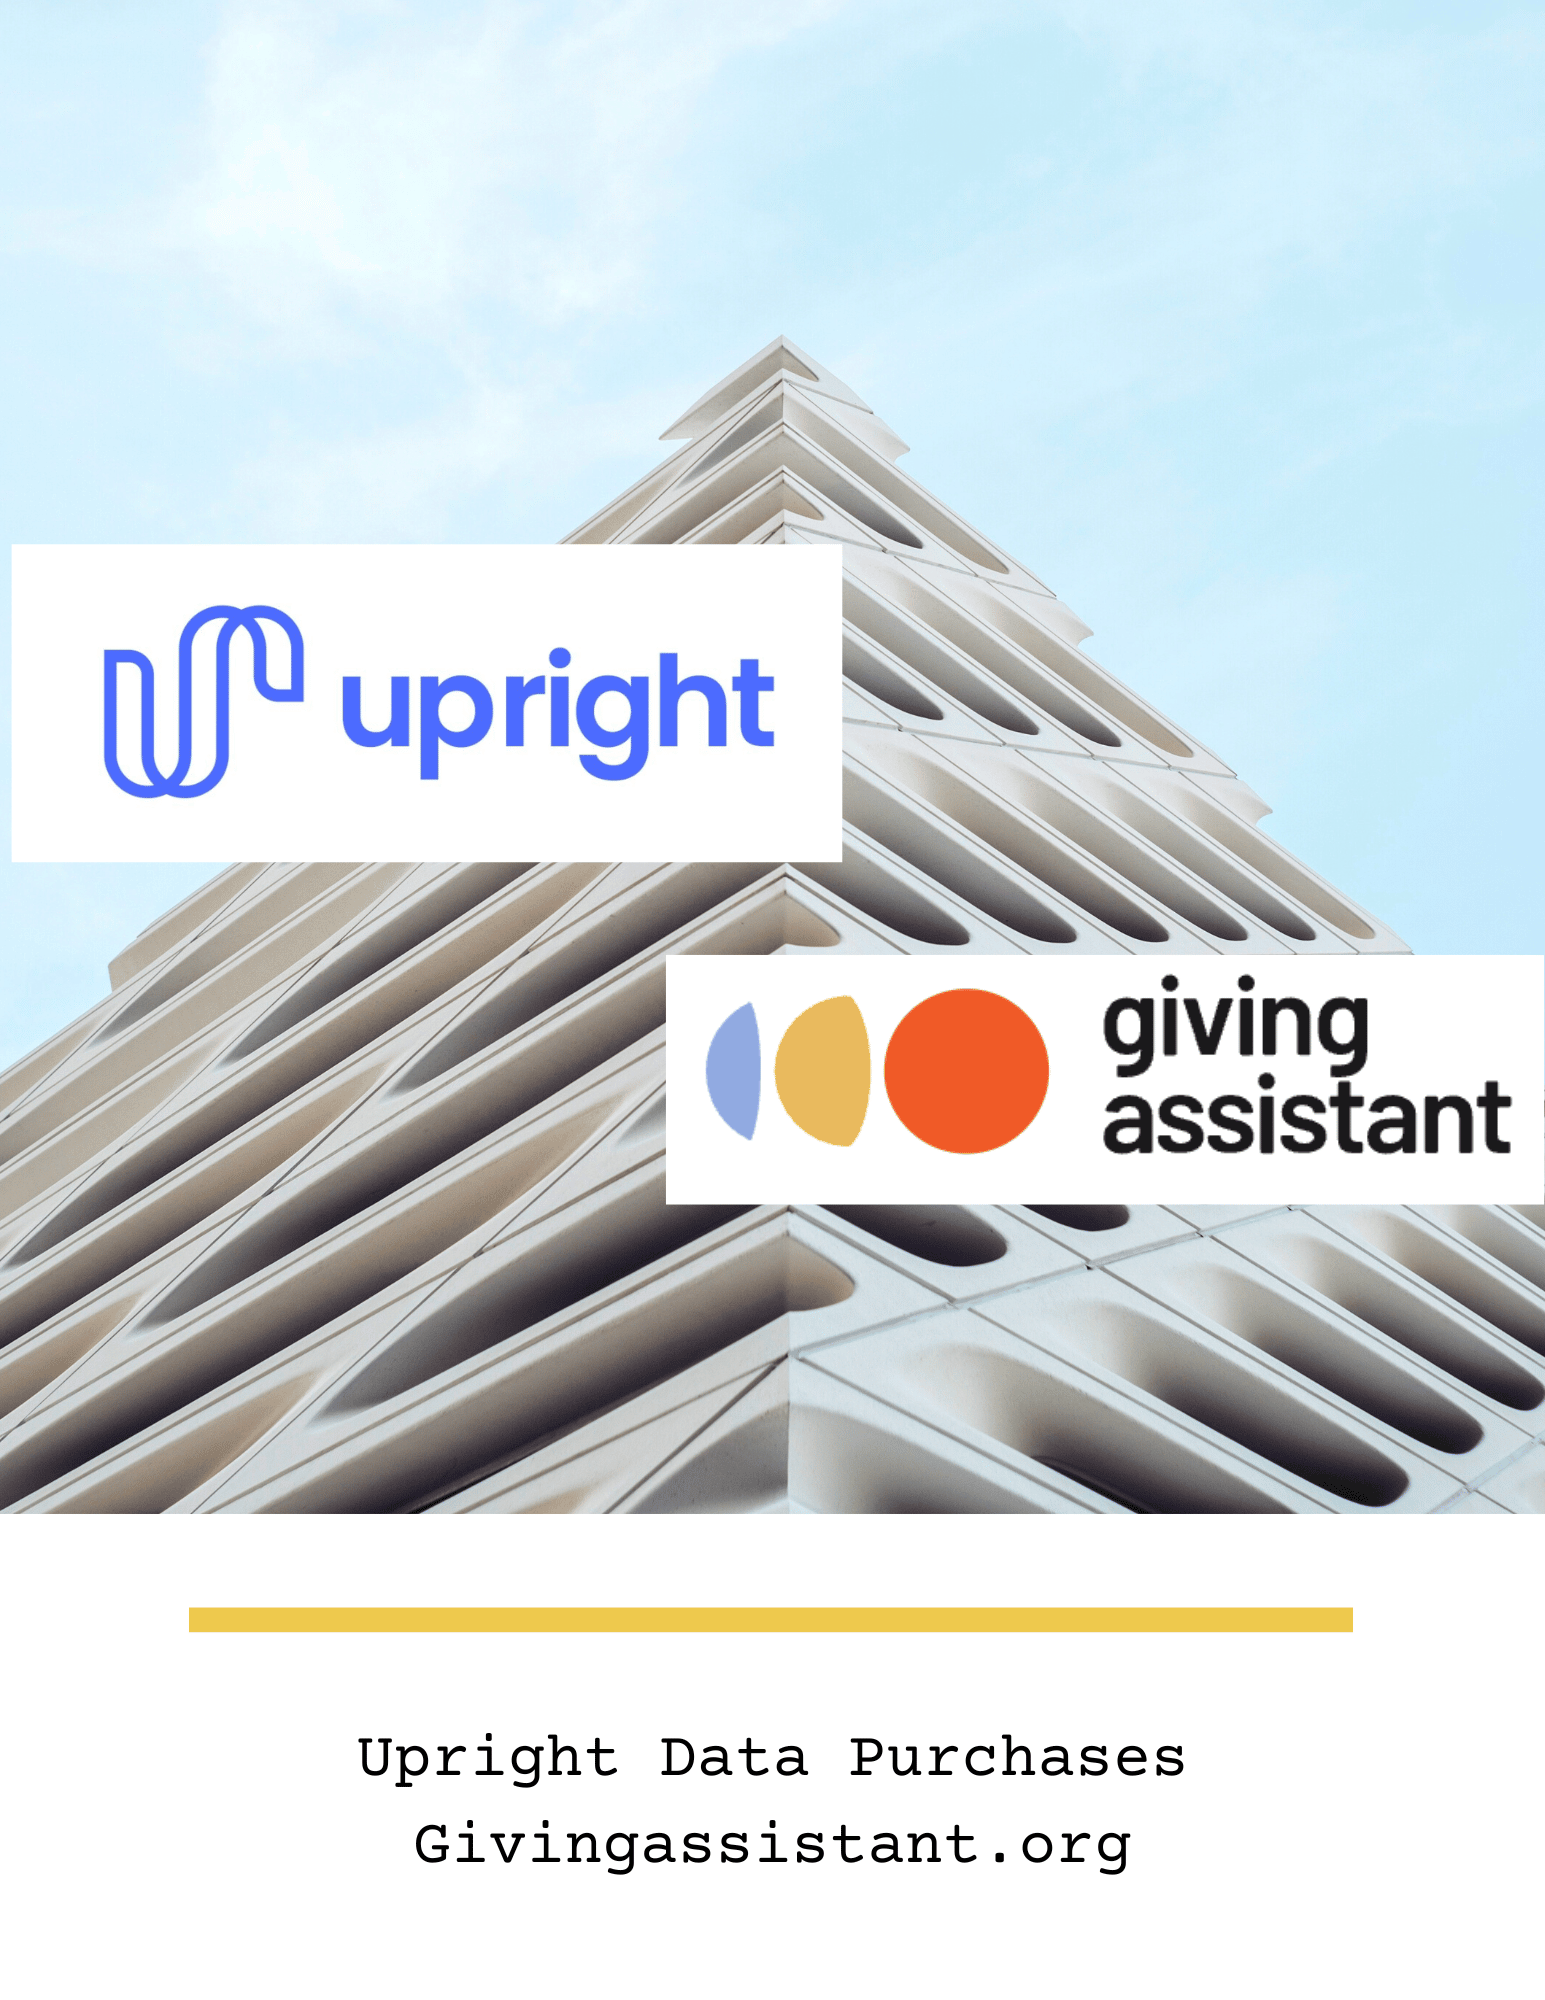 Upright Data Purchases Givingassistant.org Image 2